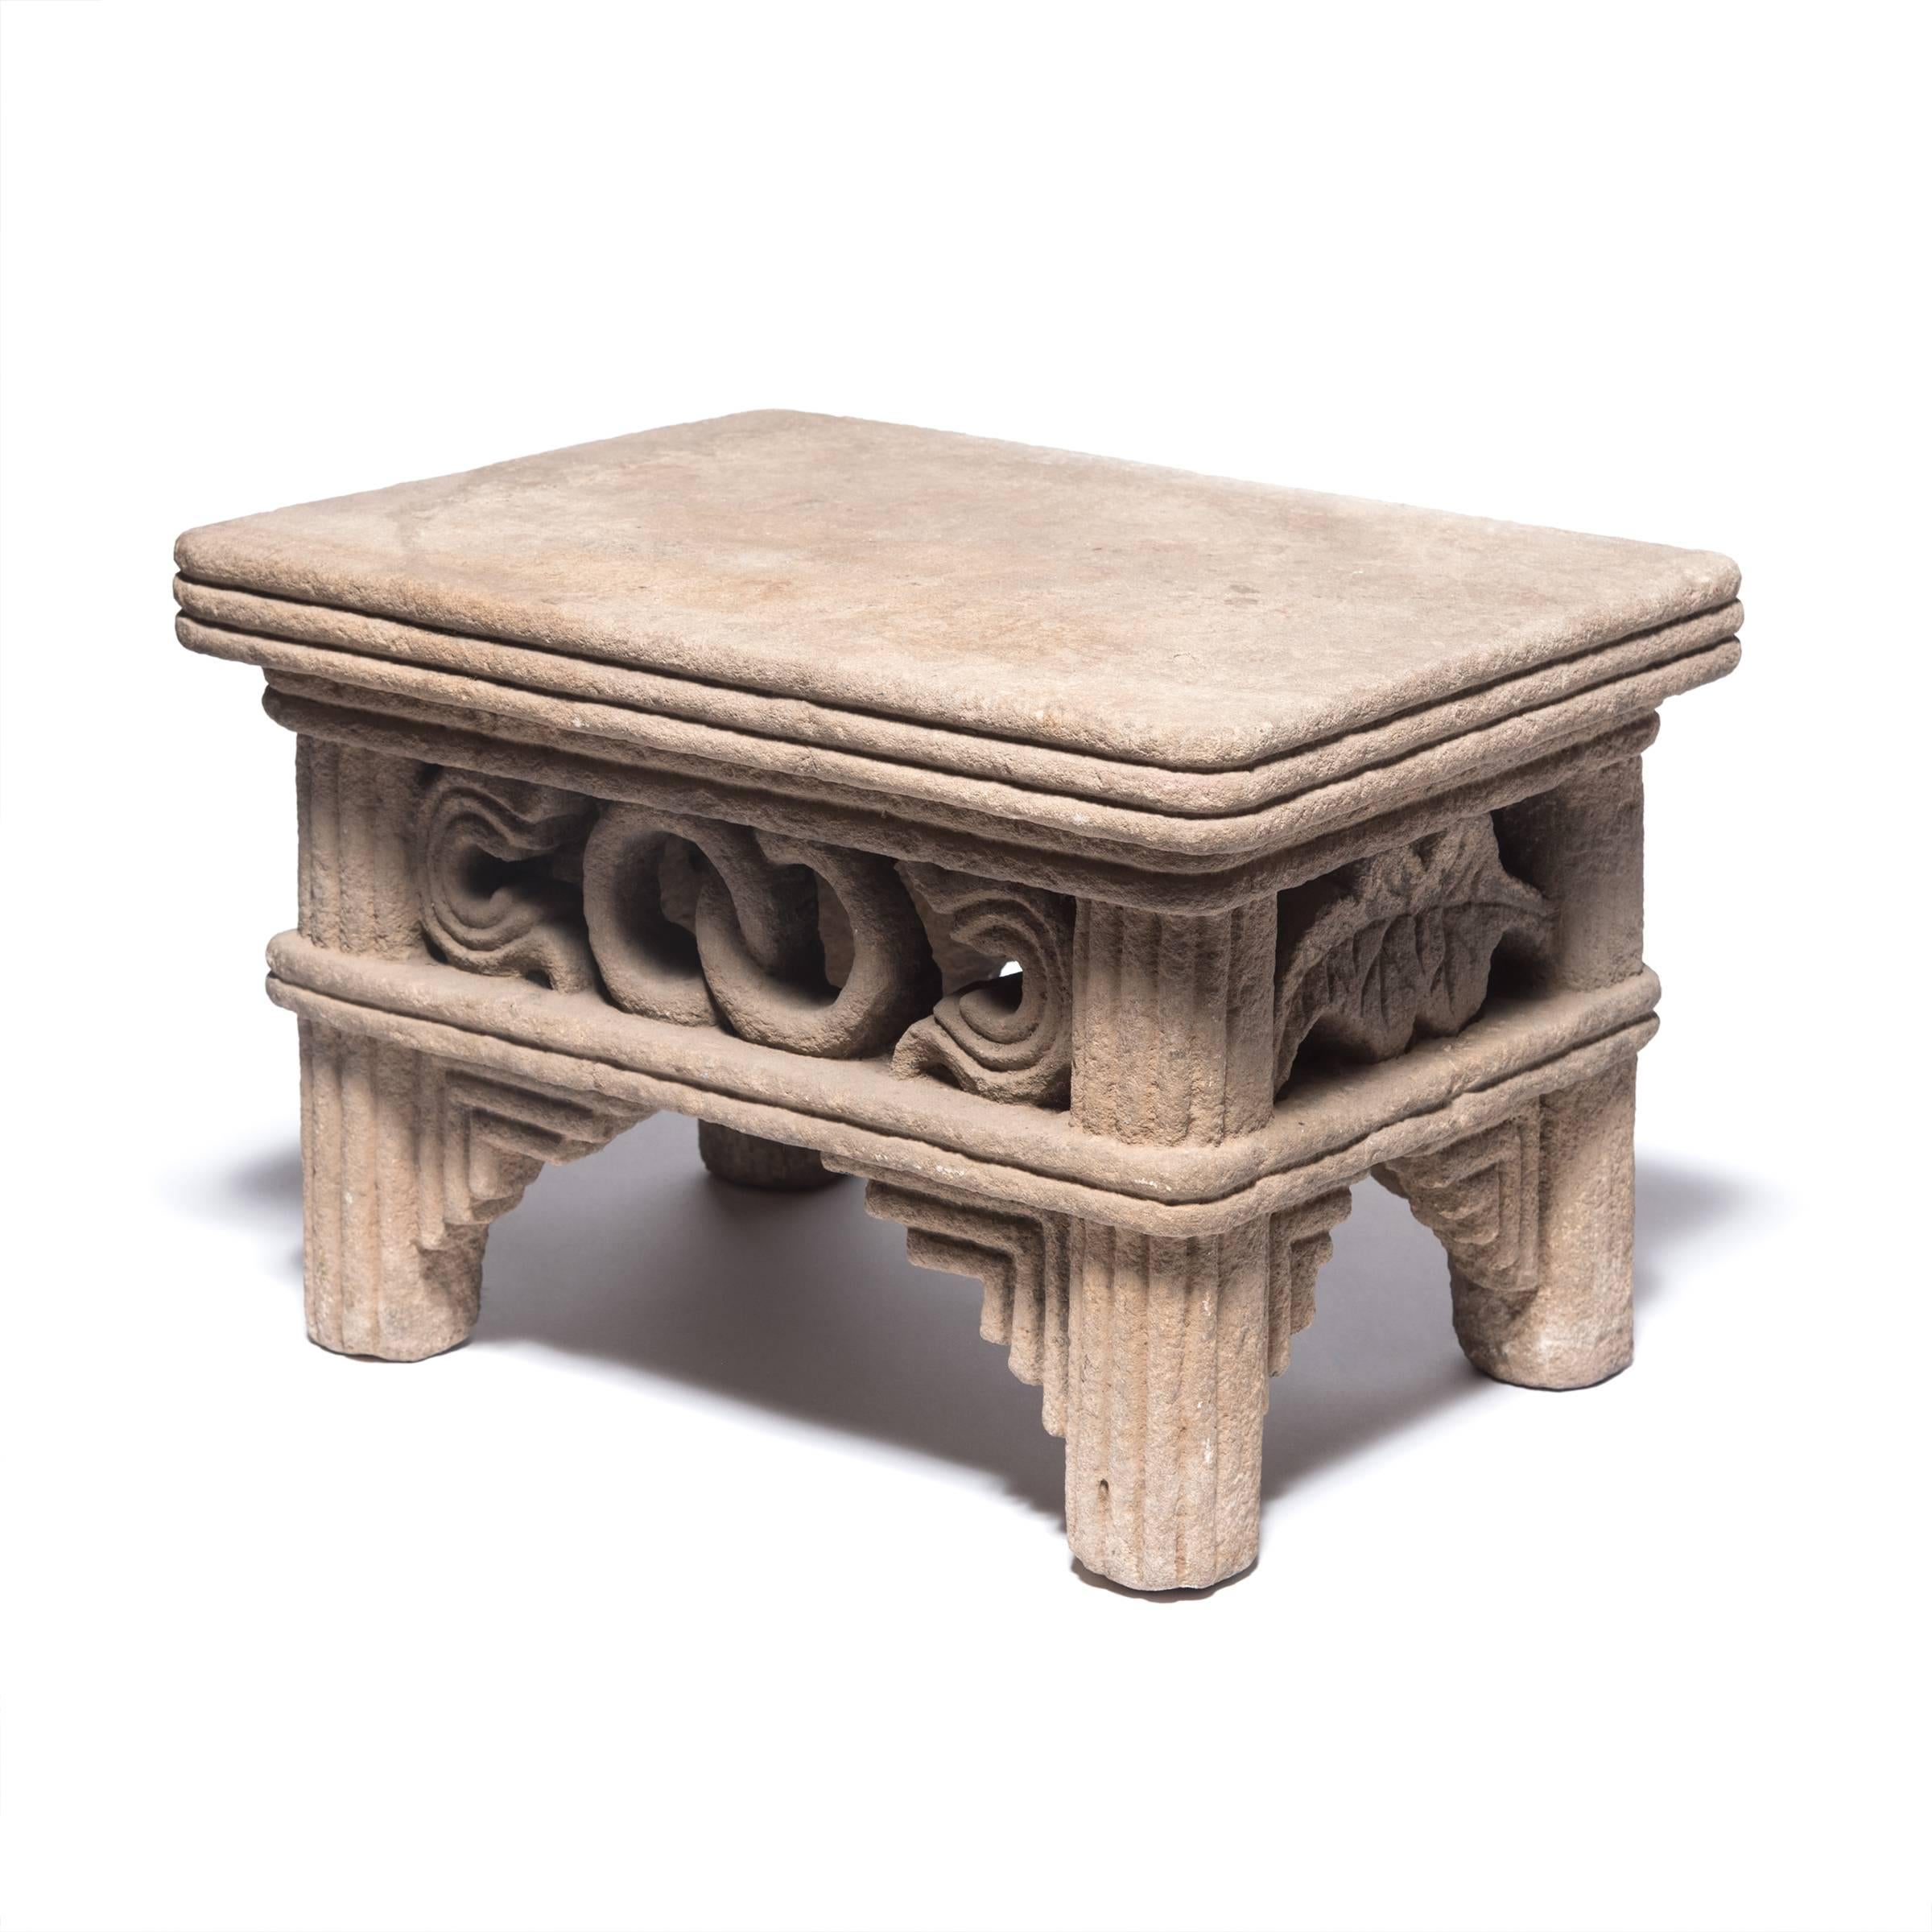 Created over 400 years ago, this low table from the late Ming/early Qing dynasty was carved by hand from a single block of limestone. The table has aprons carved with interlocking rings, symbols of eternity, and beaded “incense stick” legs, which